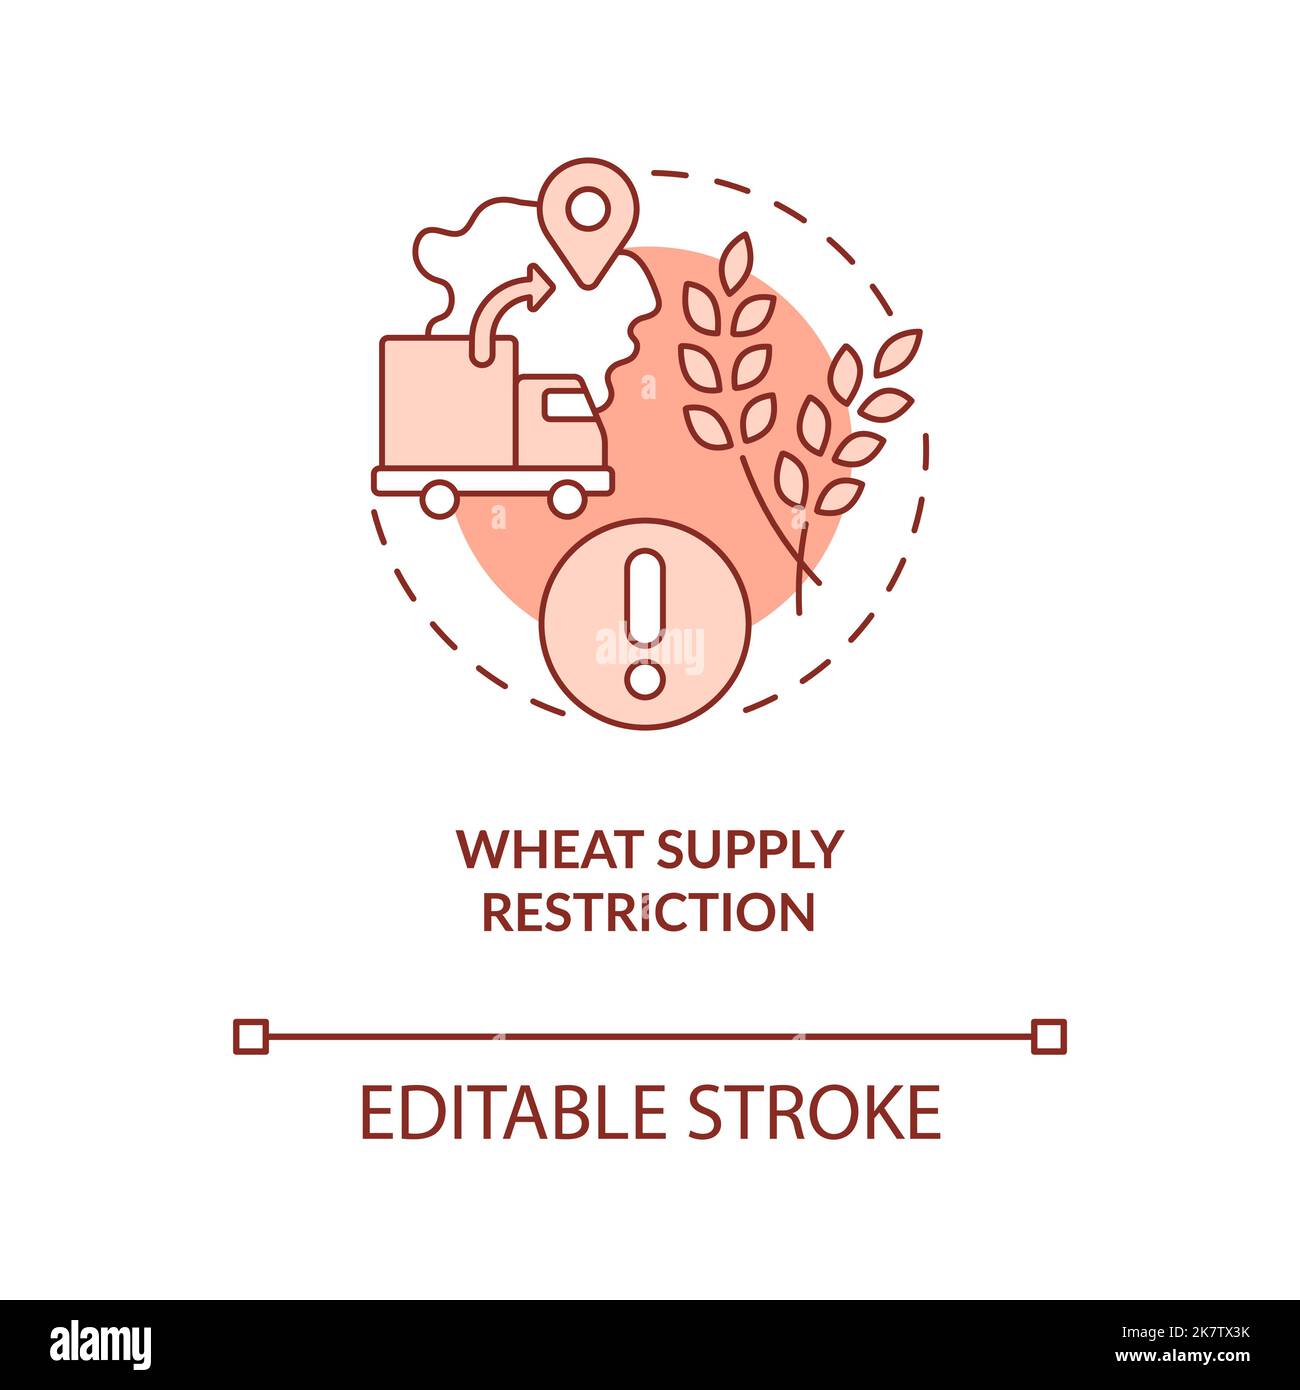 Wheat supply ban red concept icon Stock Vector